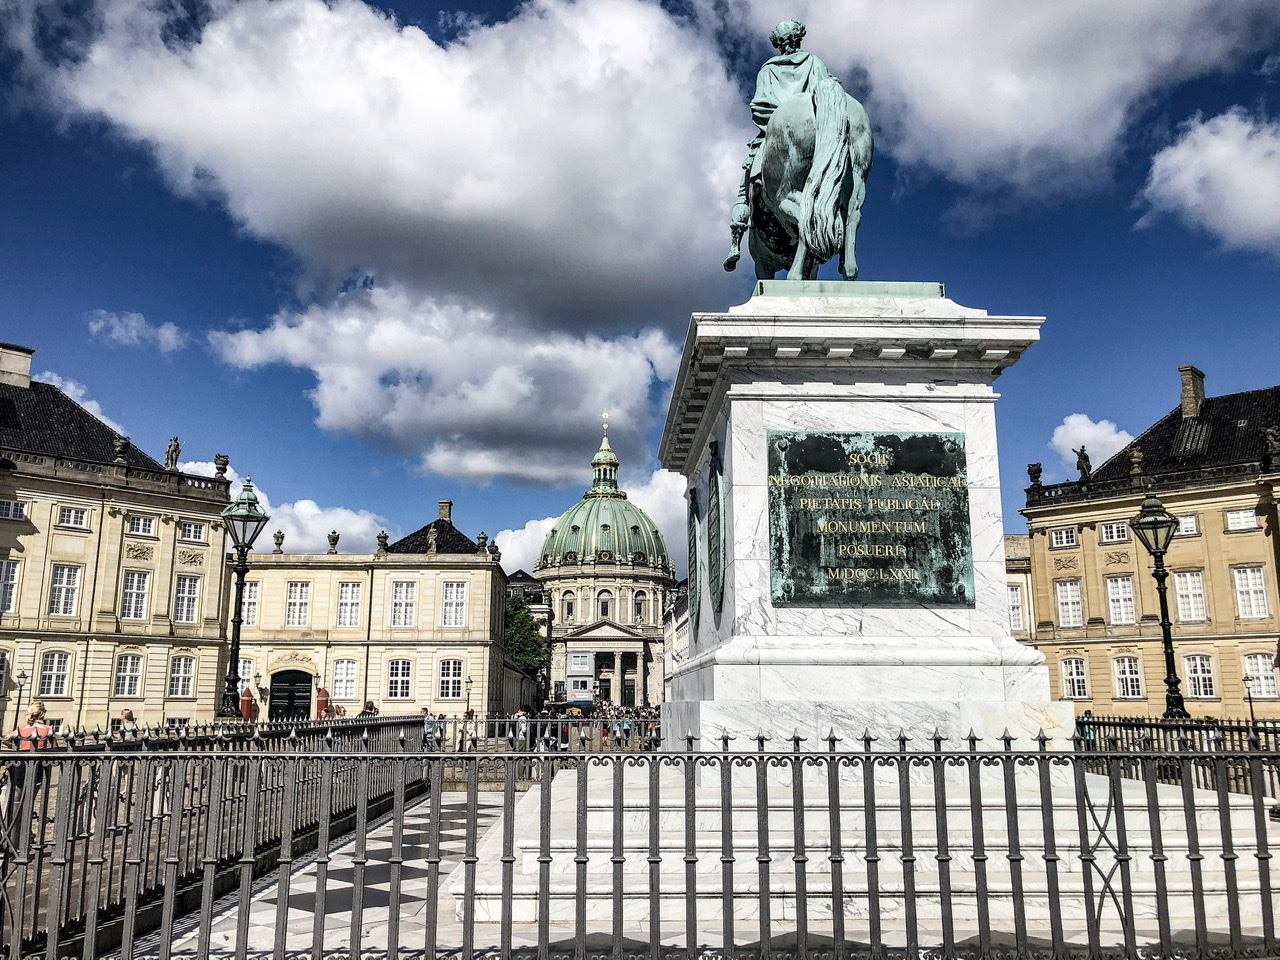 statue of person on horse in Amalienbourg courtyard with royal residences and marble church visible in background